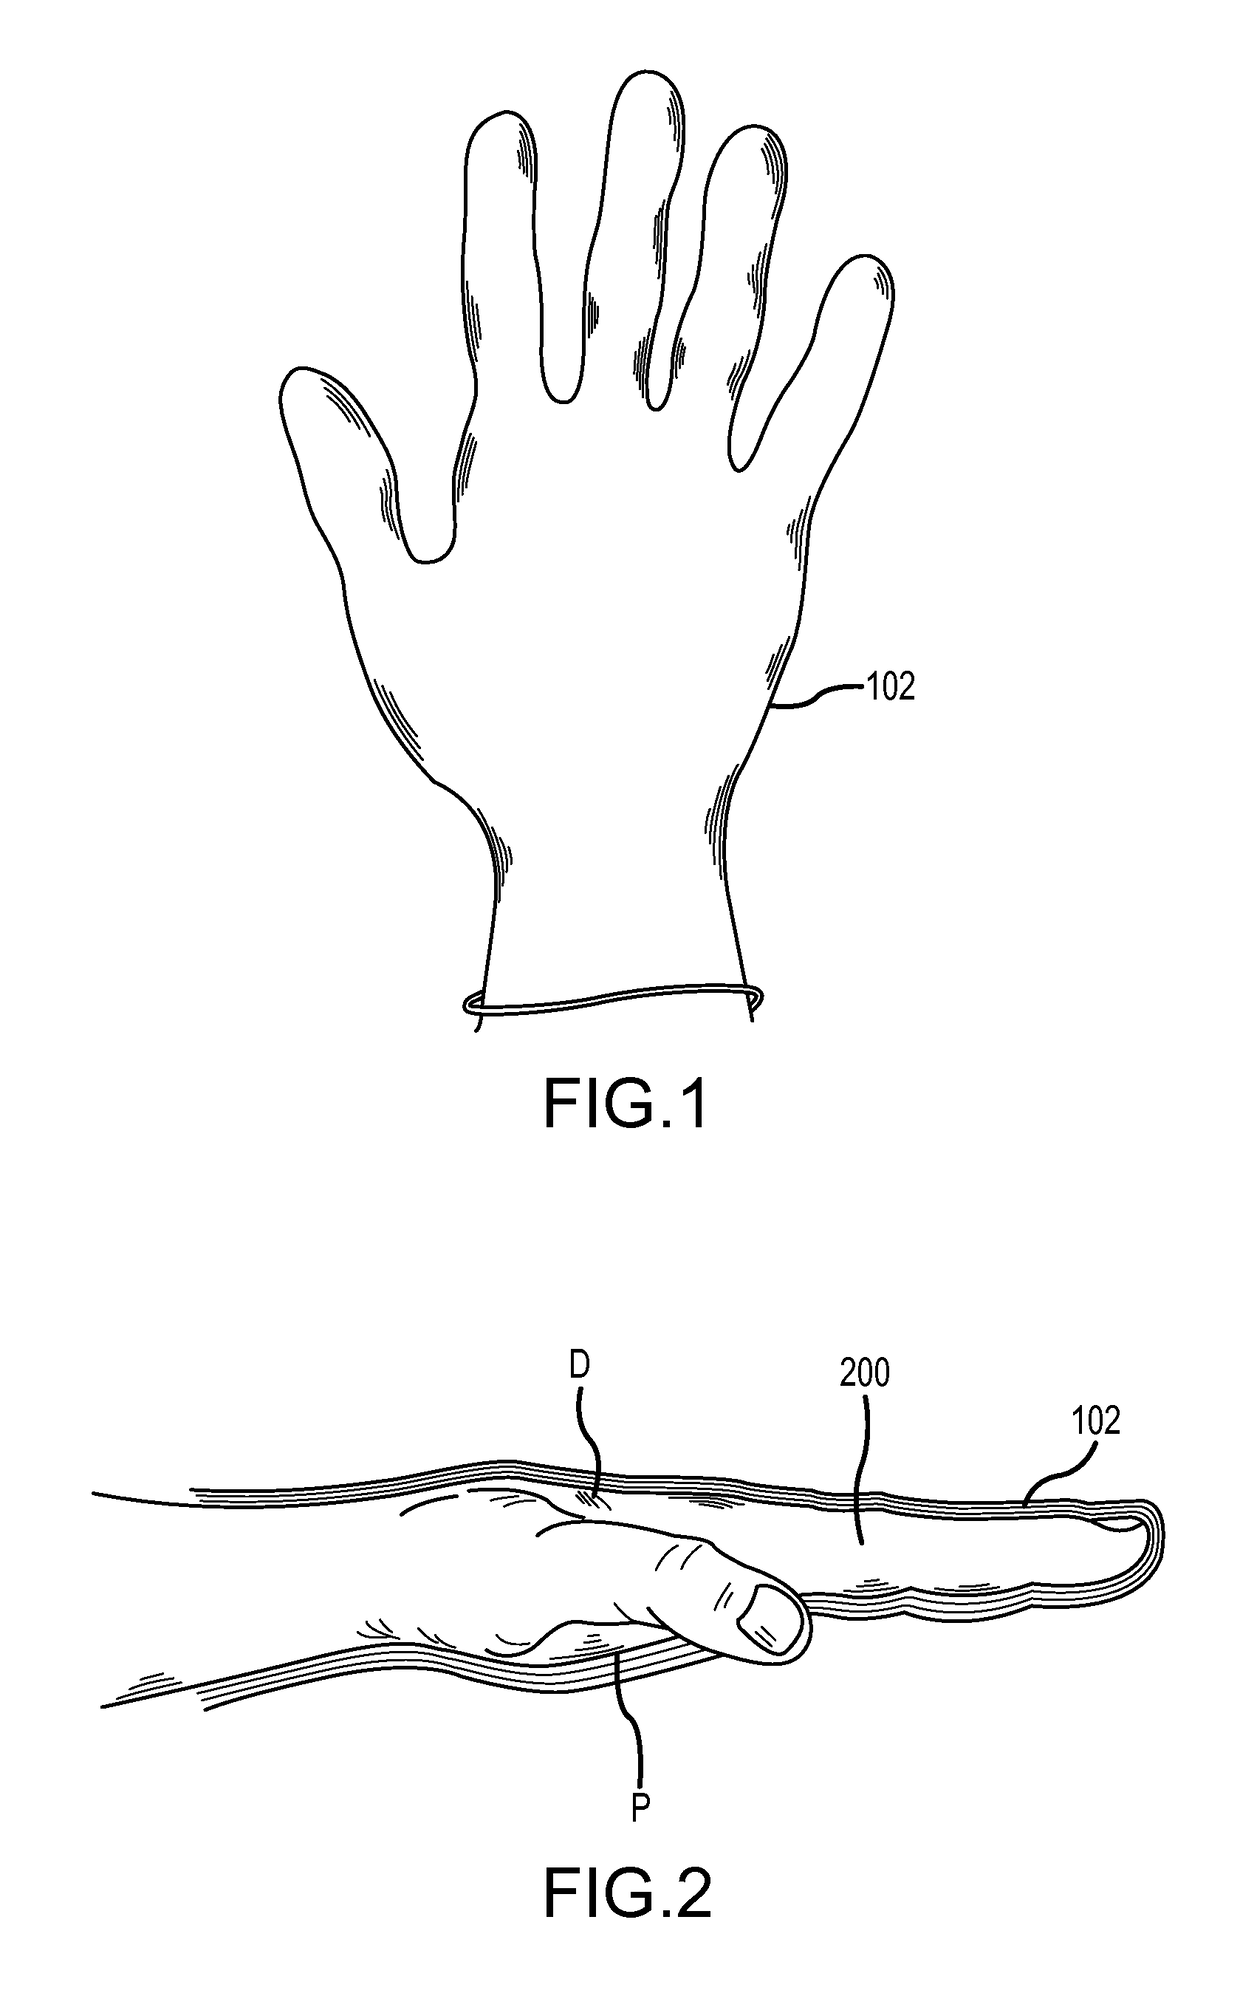 Surgical glove with ergonomic features